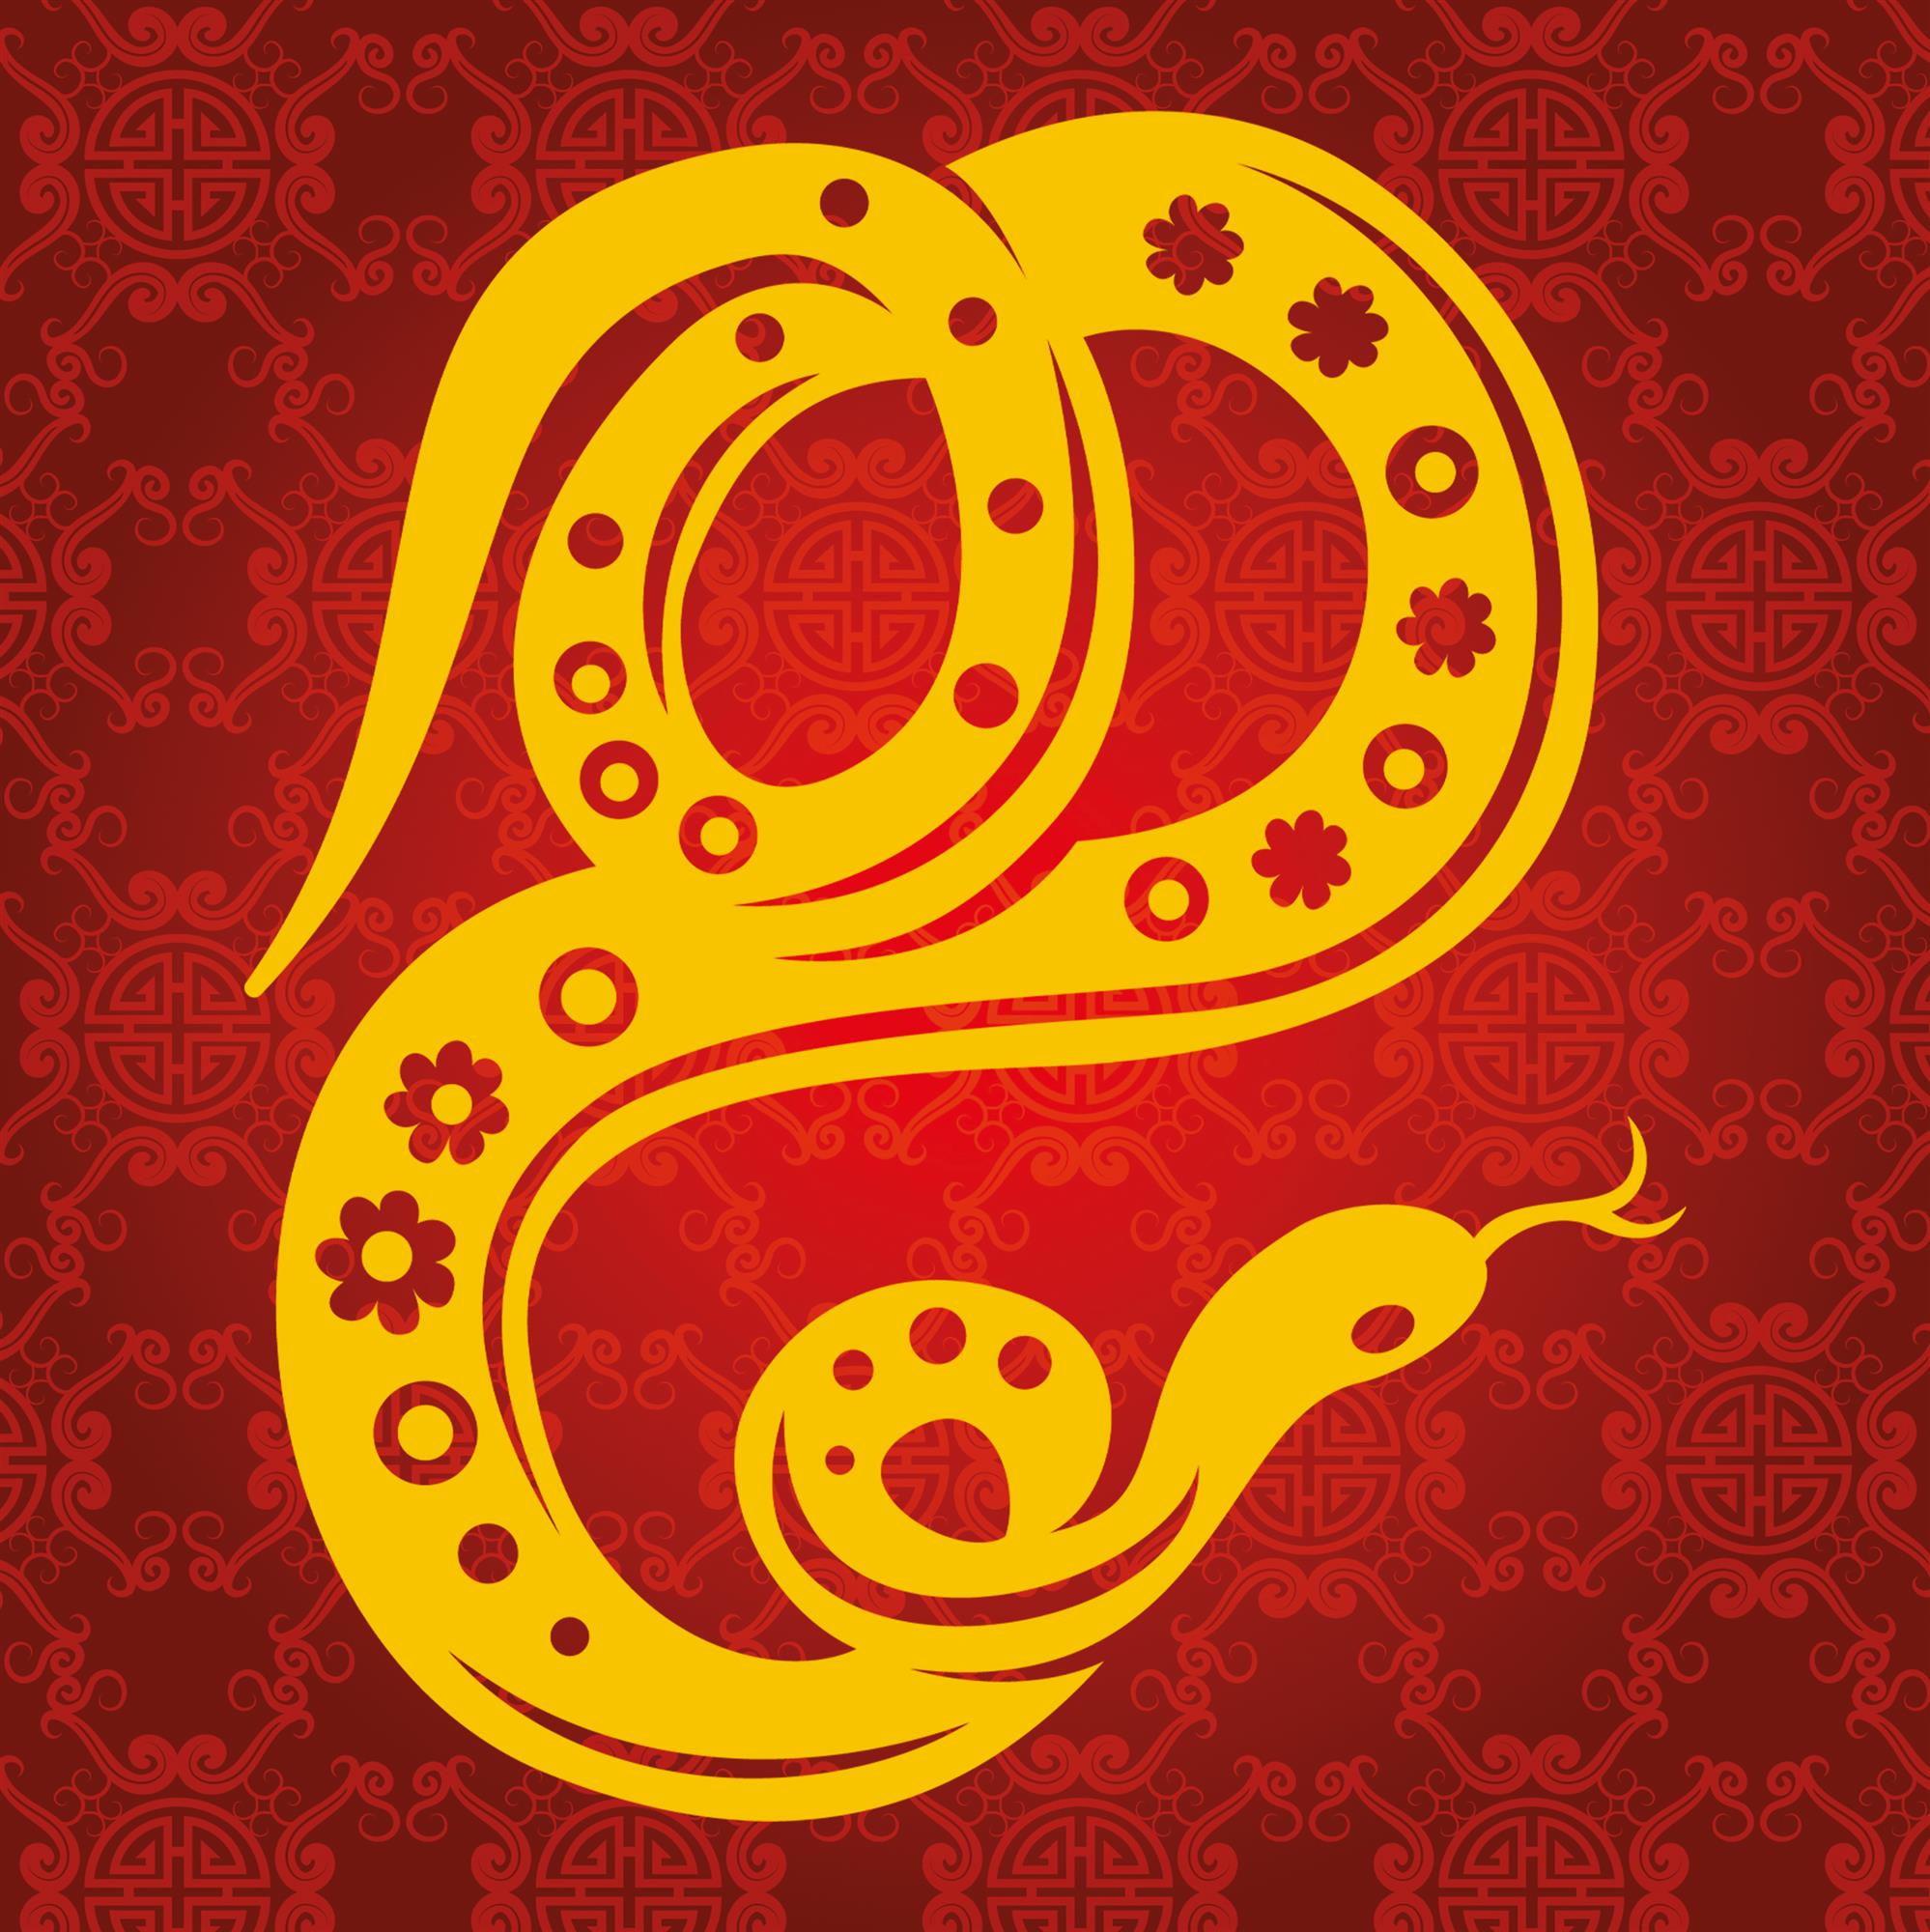 Red and yellow Chinese style illustration of a snake